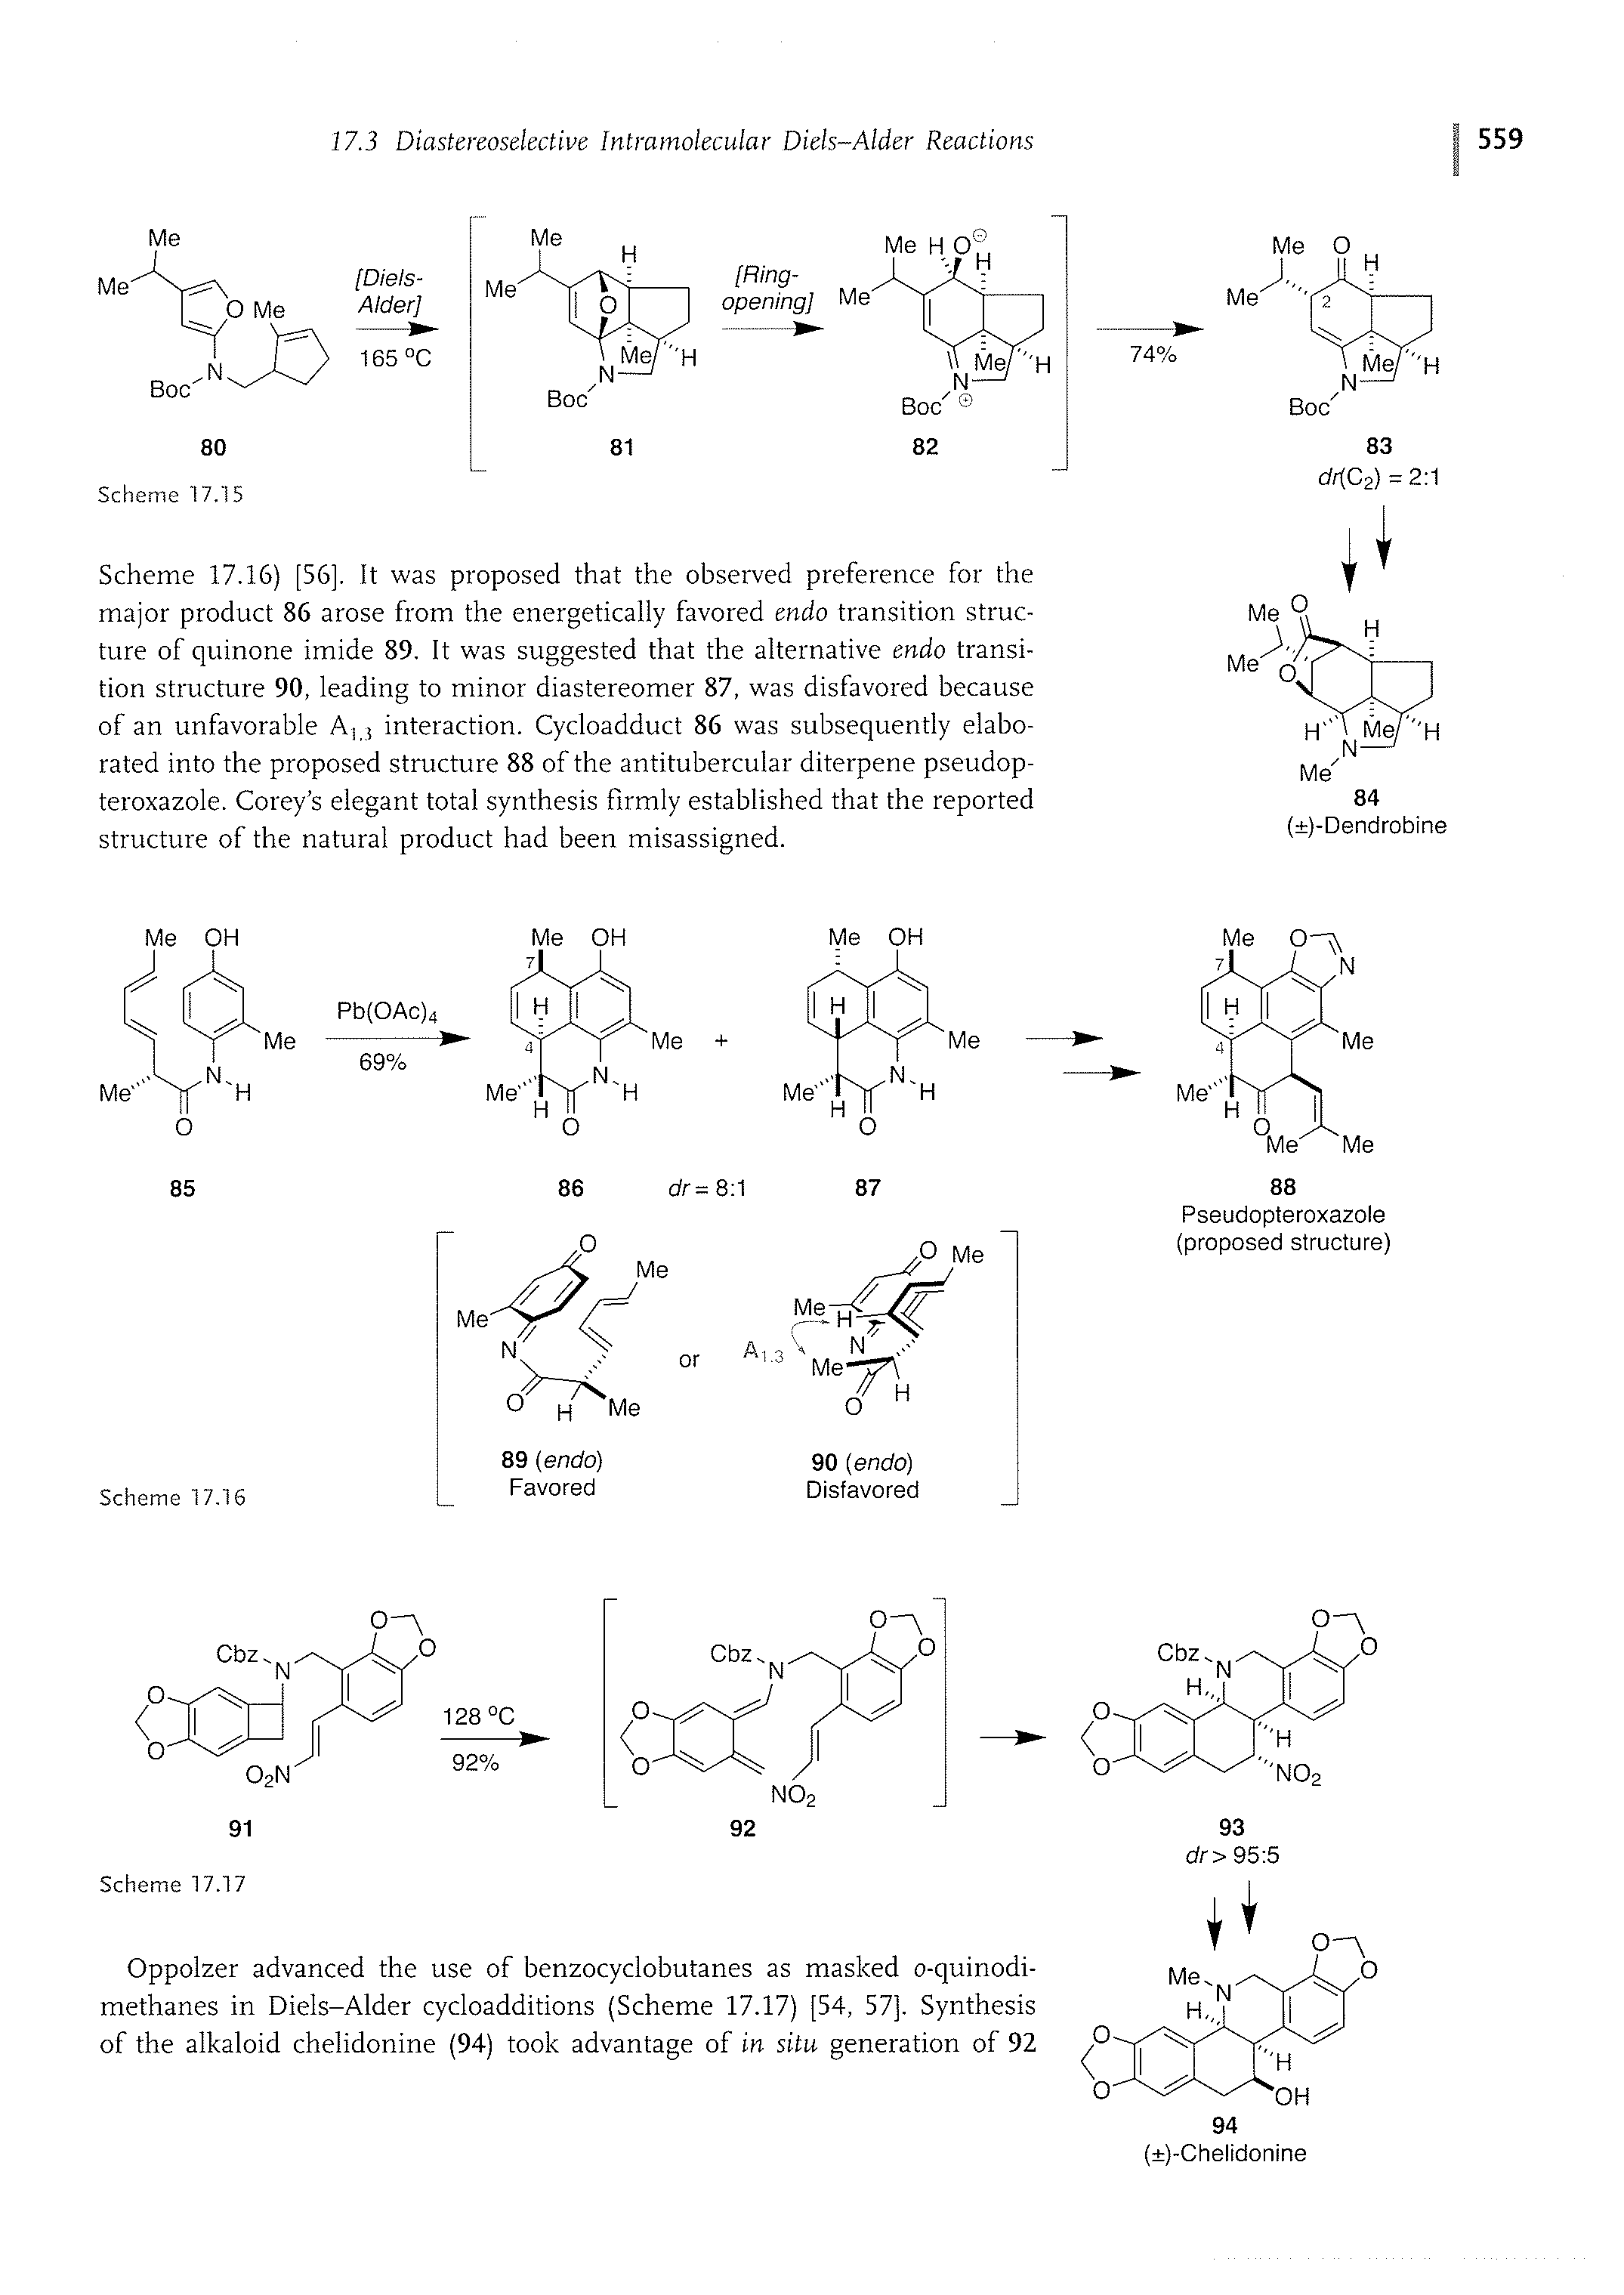 Scheme 17.16) [56]. It was proposed that the observed preference for the major product 86 arose from the energetically favored cnclo transition structure of quinone imide 89. It was suggested that the alternative endo transition structure 90, leading to minor diastereomer 87, was disfavored because of an unfavorable A interaction. Cycloadduct 86 was subsequently elaborated into the proposed structure 88 of the antitubercular diterpene pseudop-teroxazole. Corey s elegant total synthesis firmly established that the reported structure of the natural product had been misassigned.